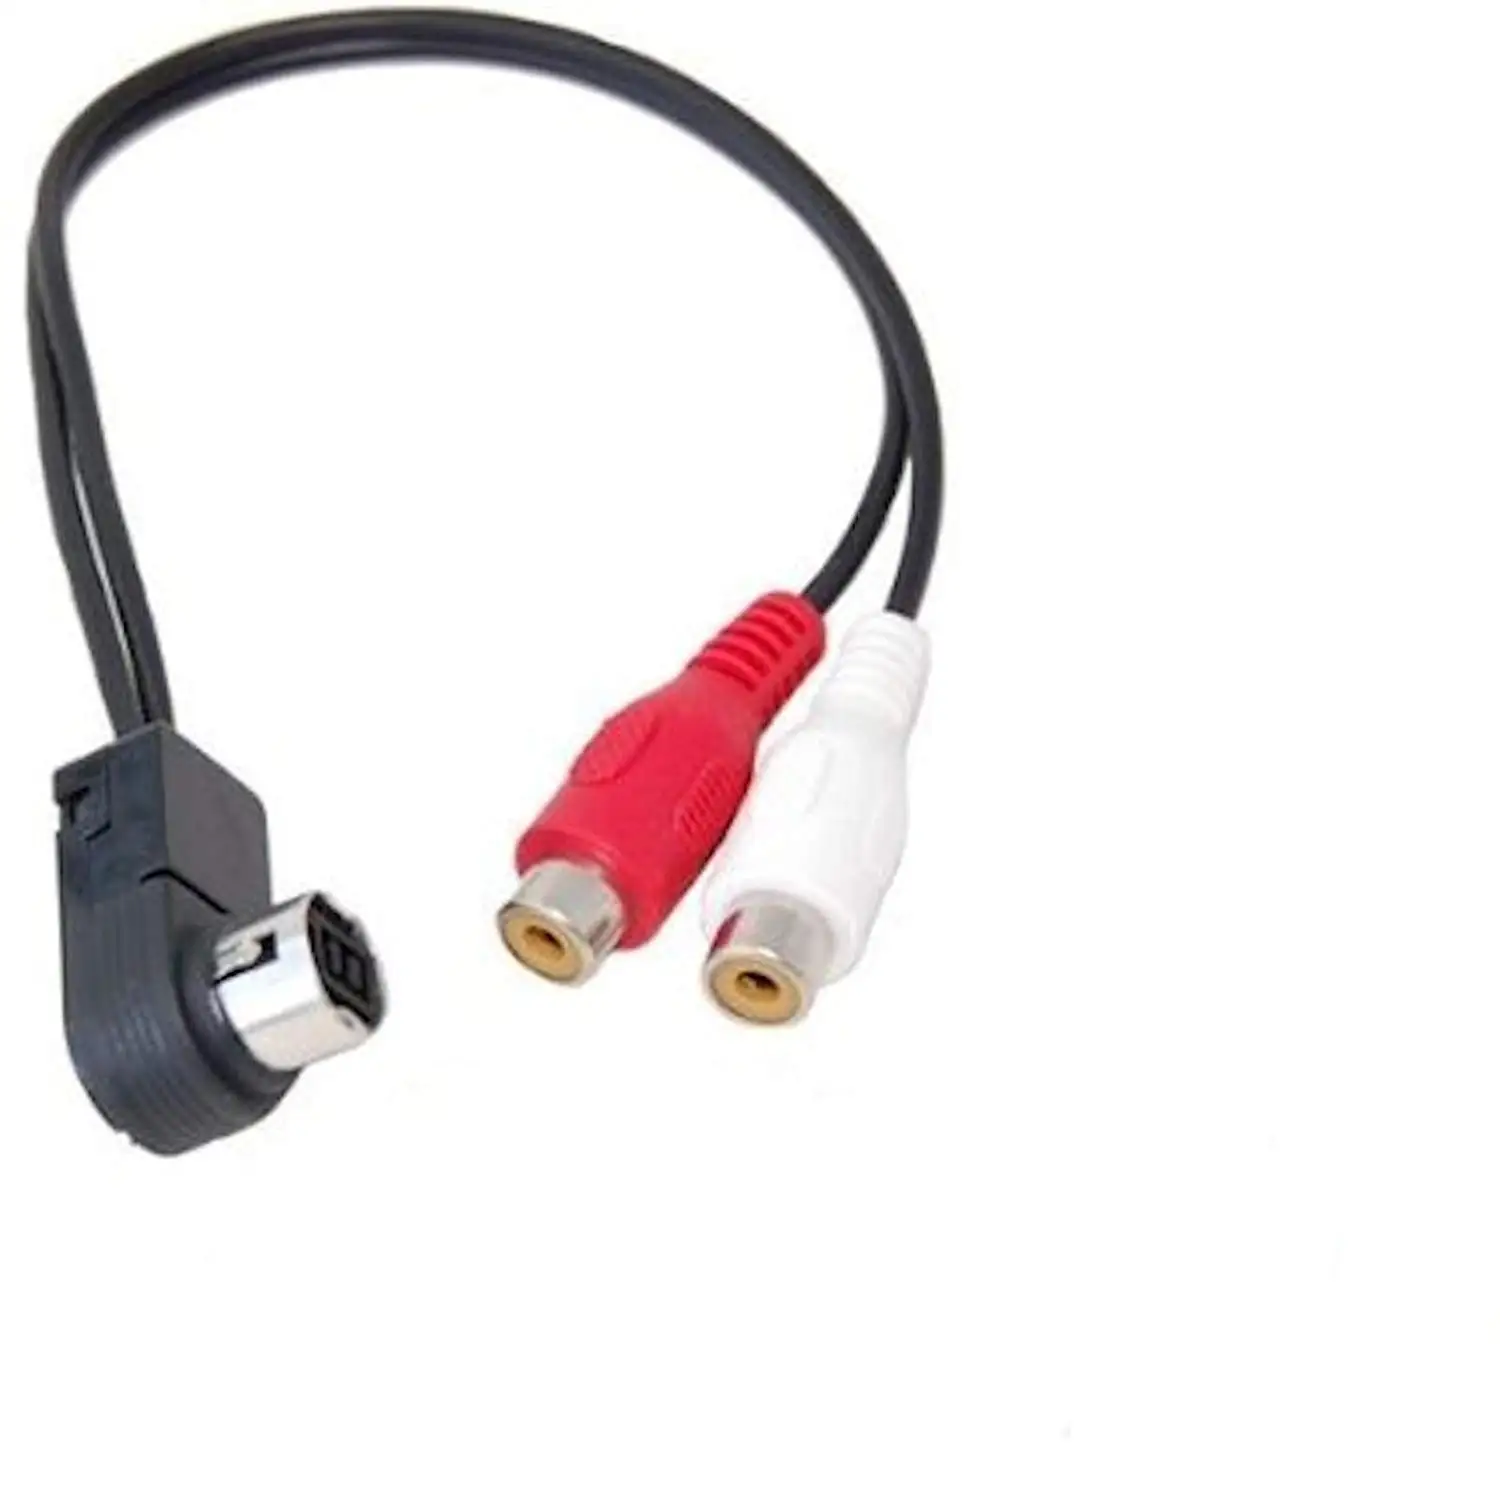 Buy 5V Cable For iPod iPhone CDA-9886 9887 CDE-9852 9870 9872 9873 for